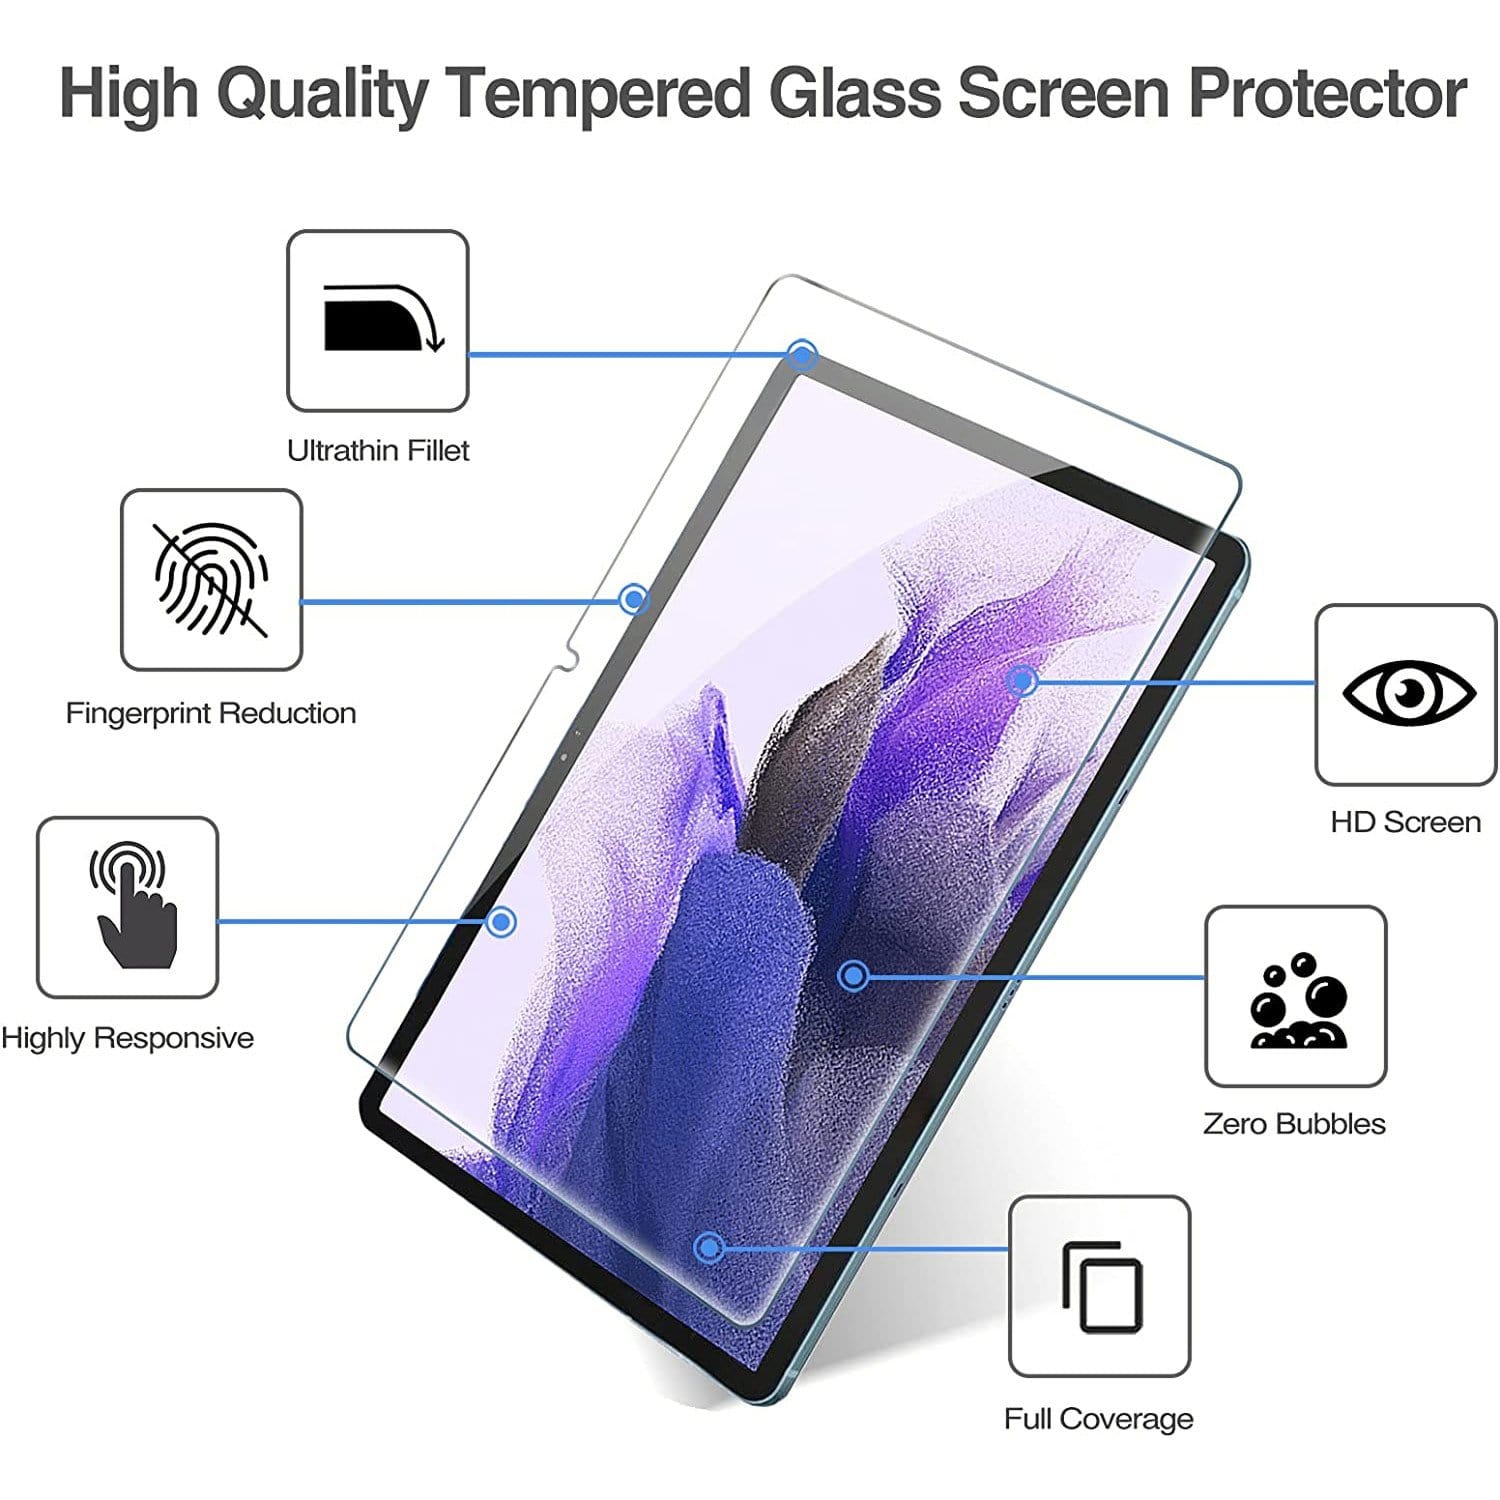 ZeroDamage Tempered Glass Screen Protector for Samsung Galaxy Tab S7 FE - Clear